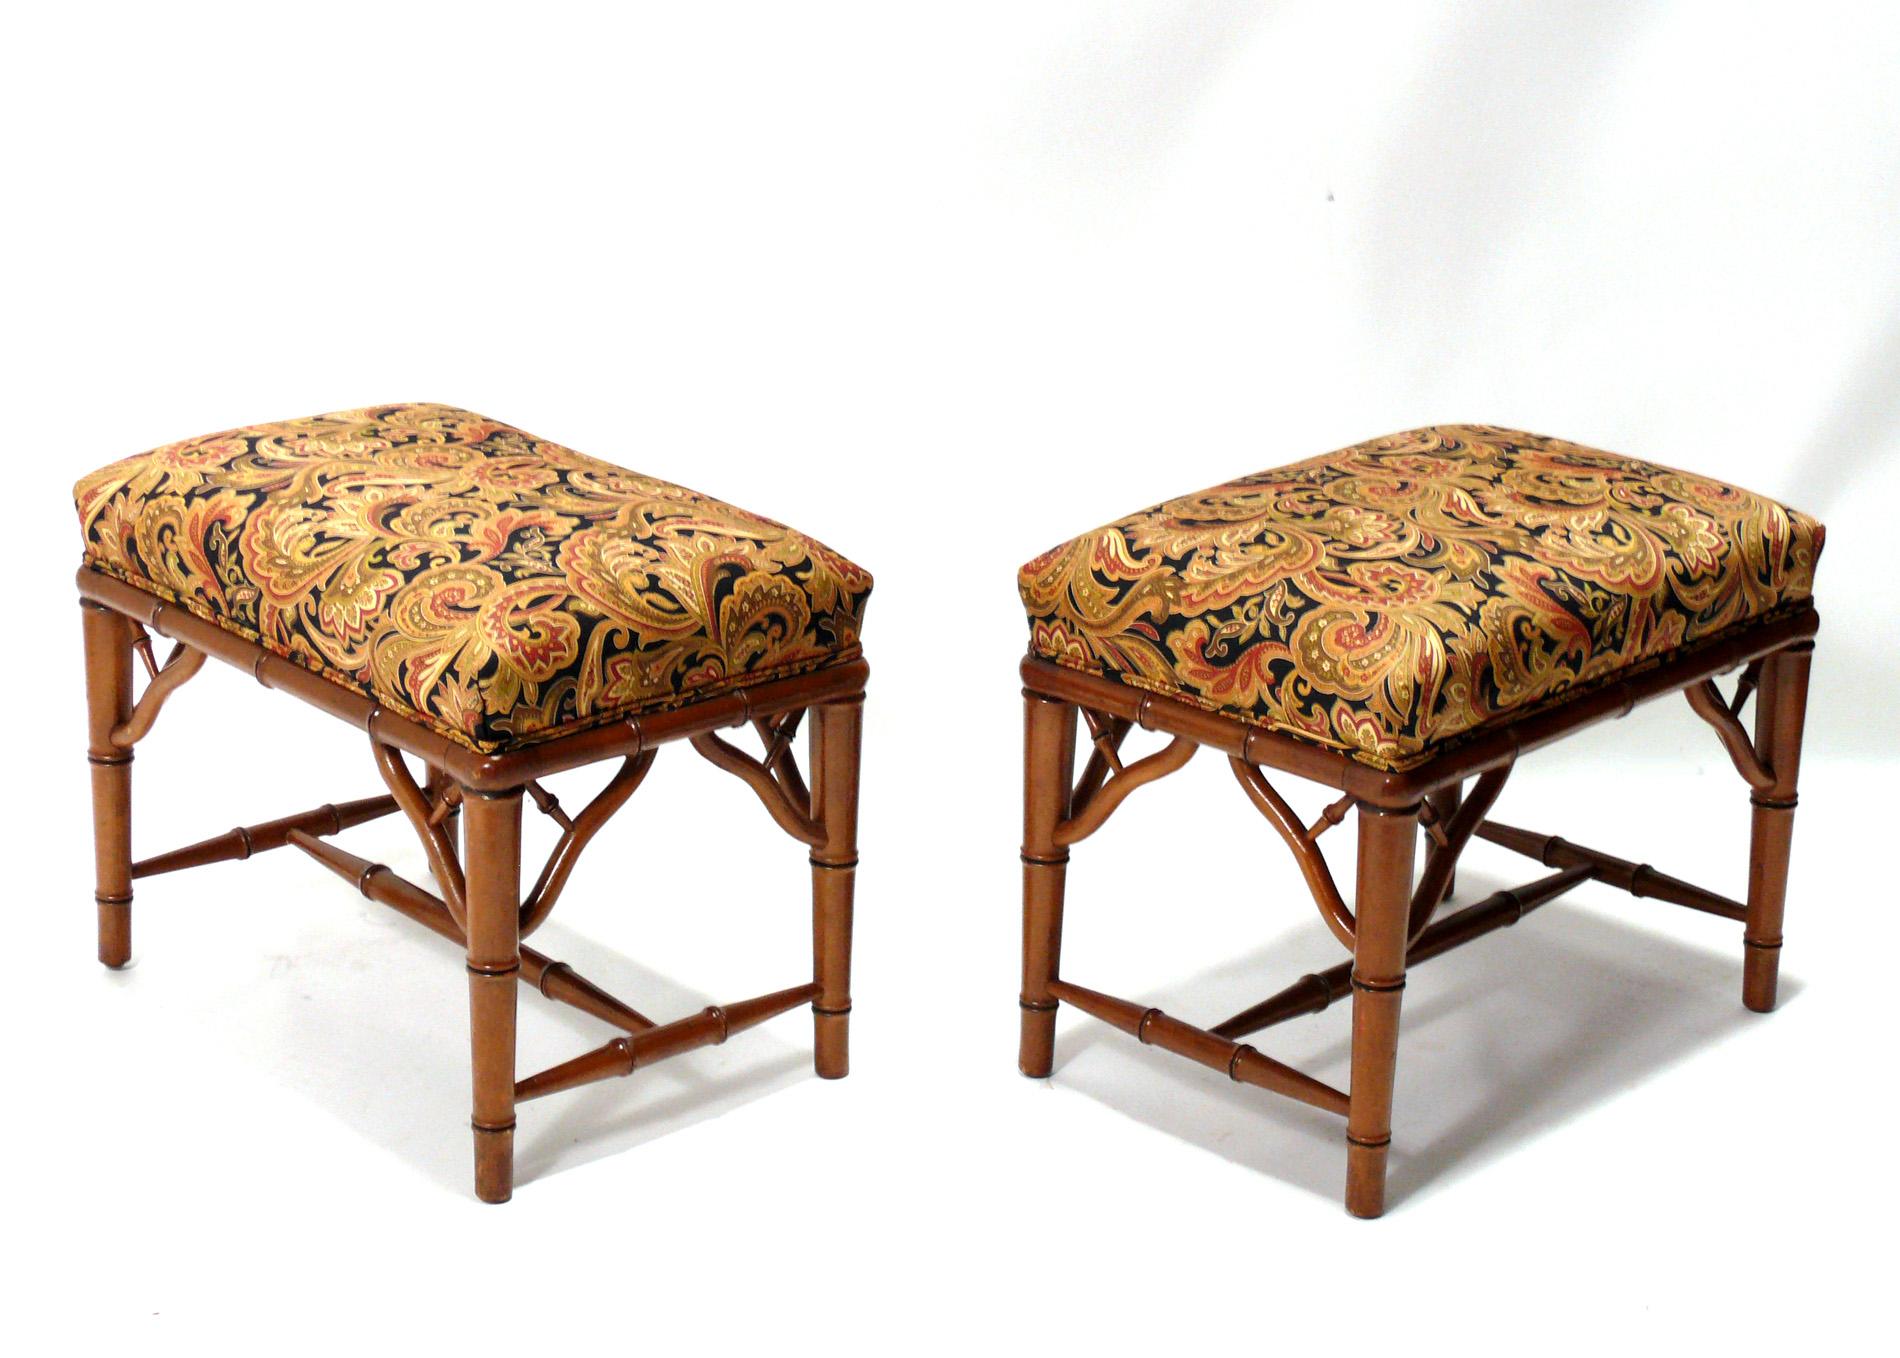 Hollywood Regency Pair of Faux Bamboo Stools or Benches For Sale